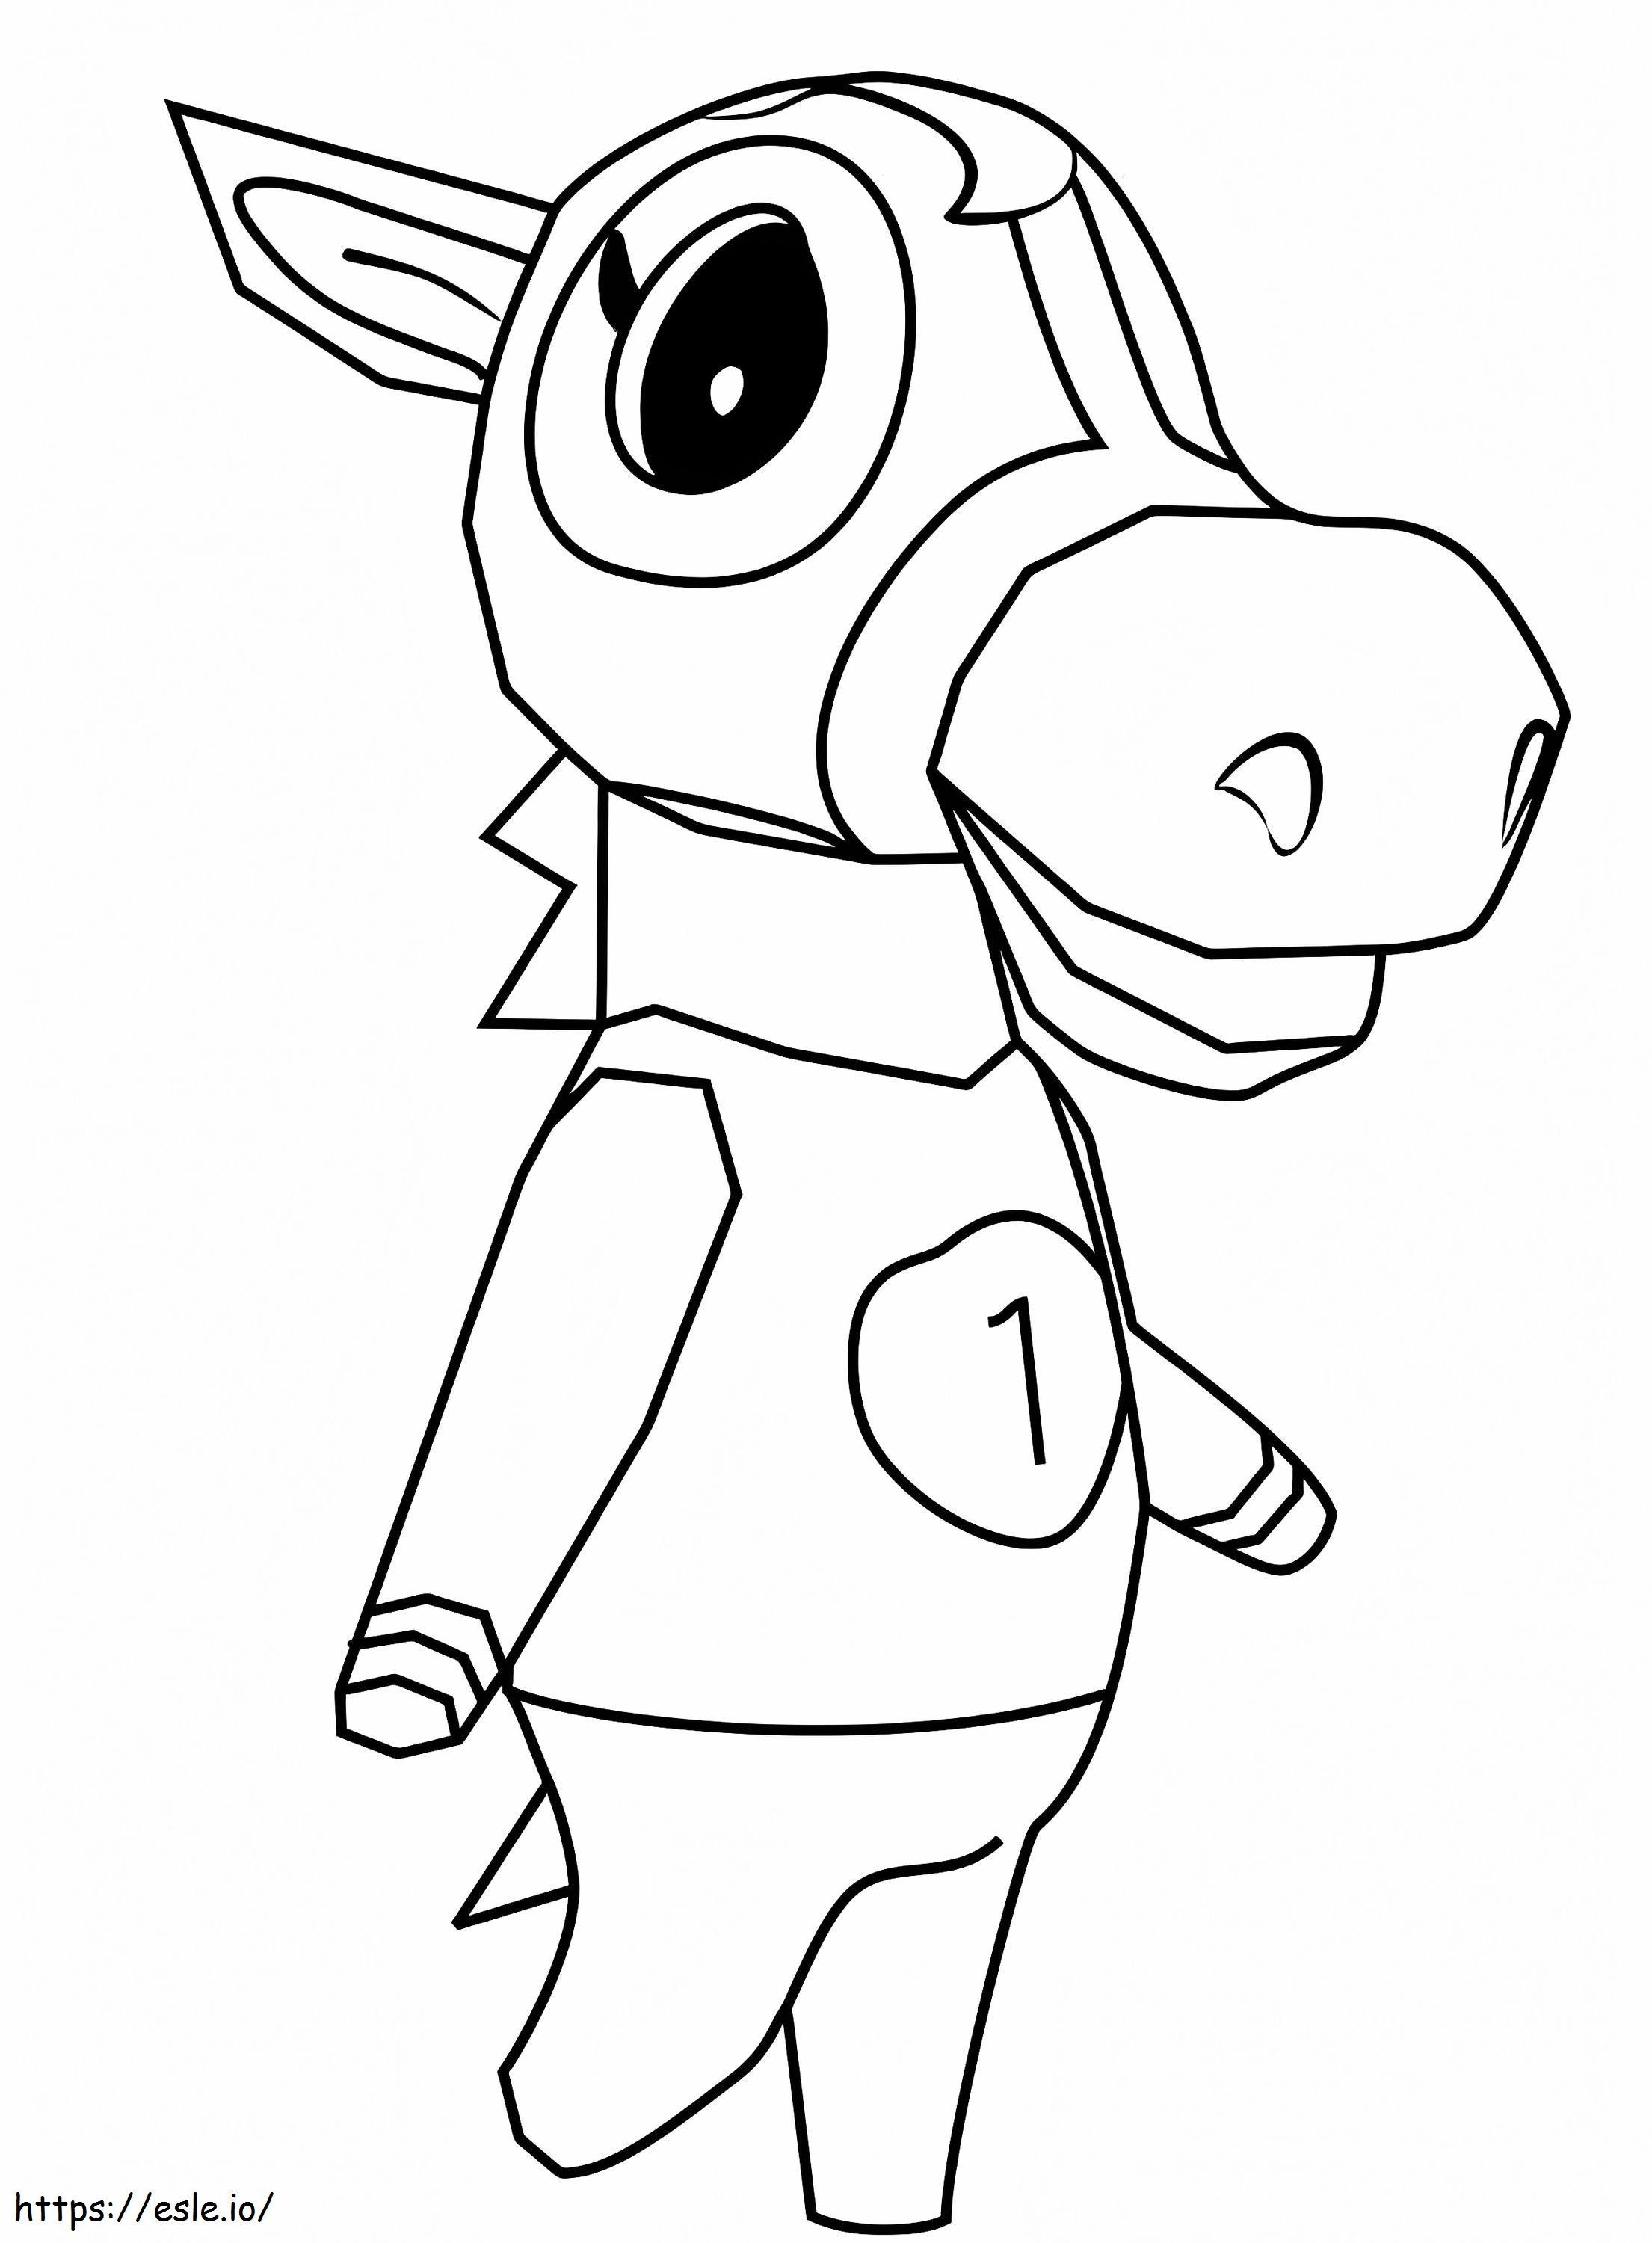 Victoria From Animal Crossing coloring page